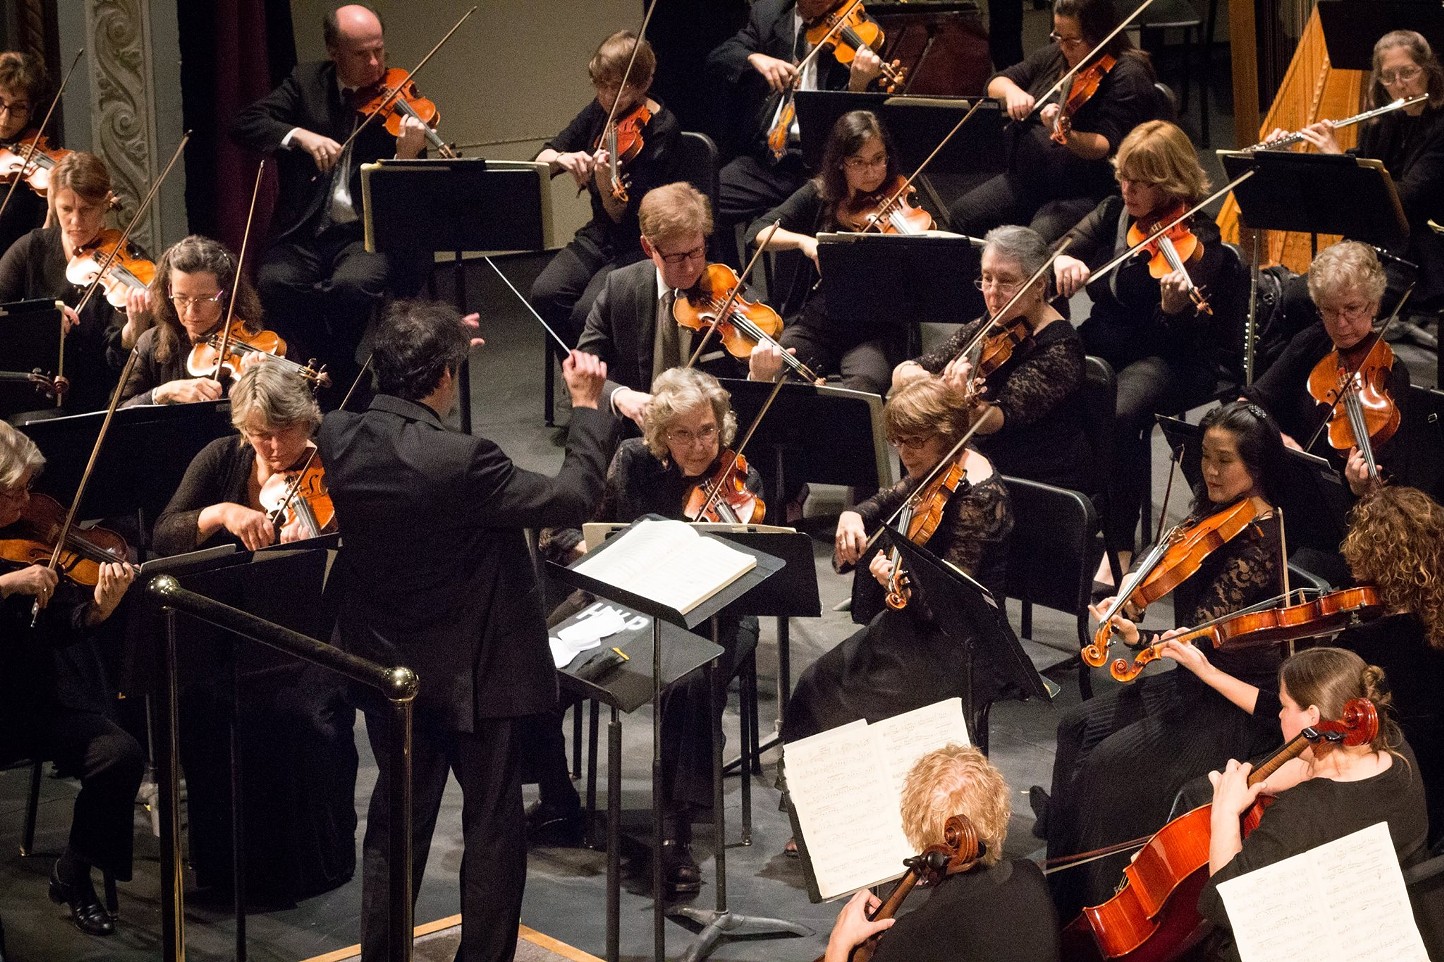 Hudson Valley Philharmonic Petitions for Help and Separation